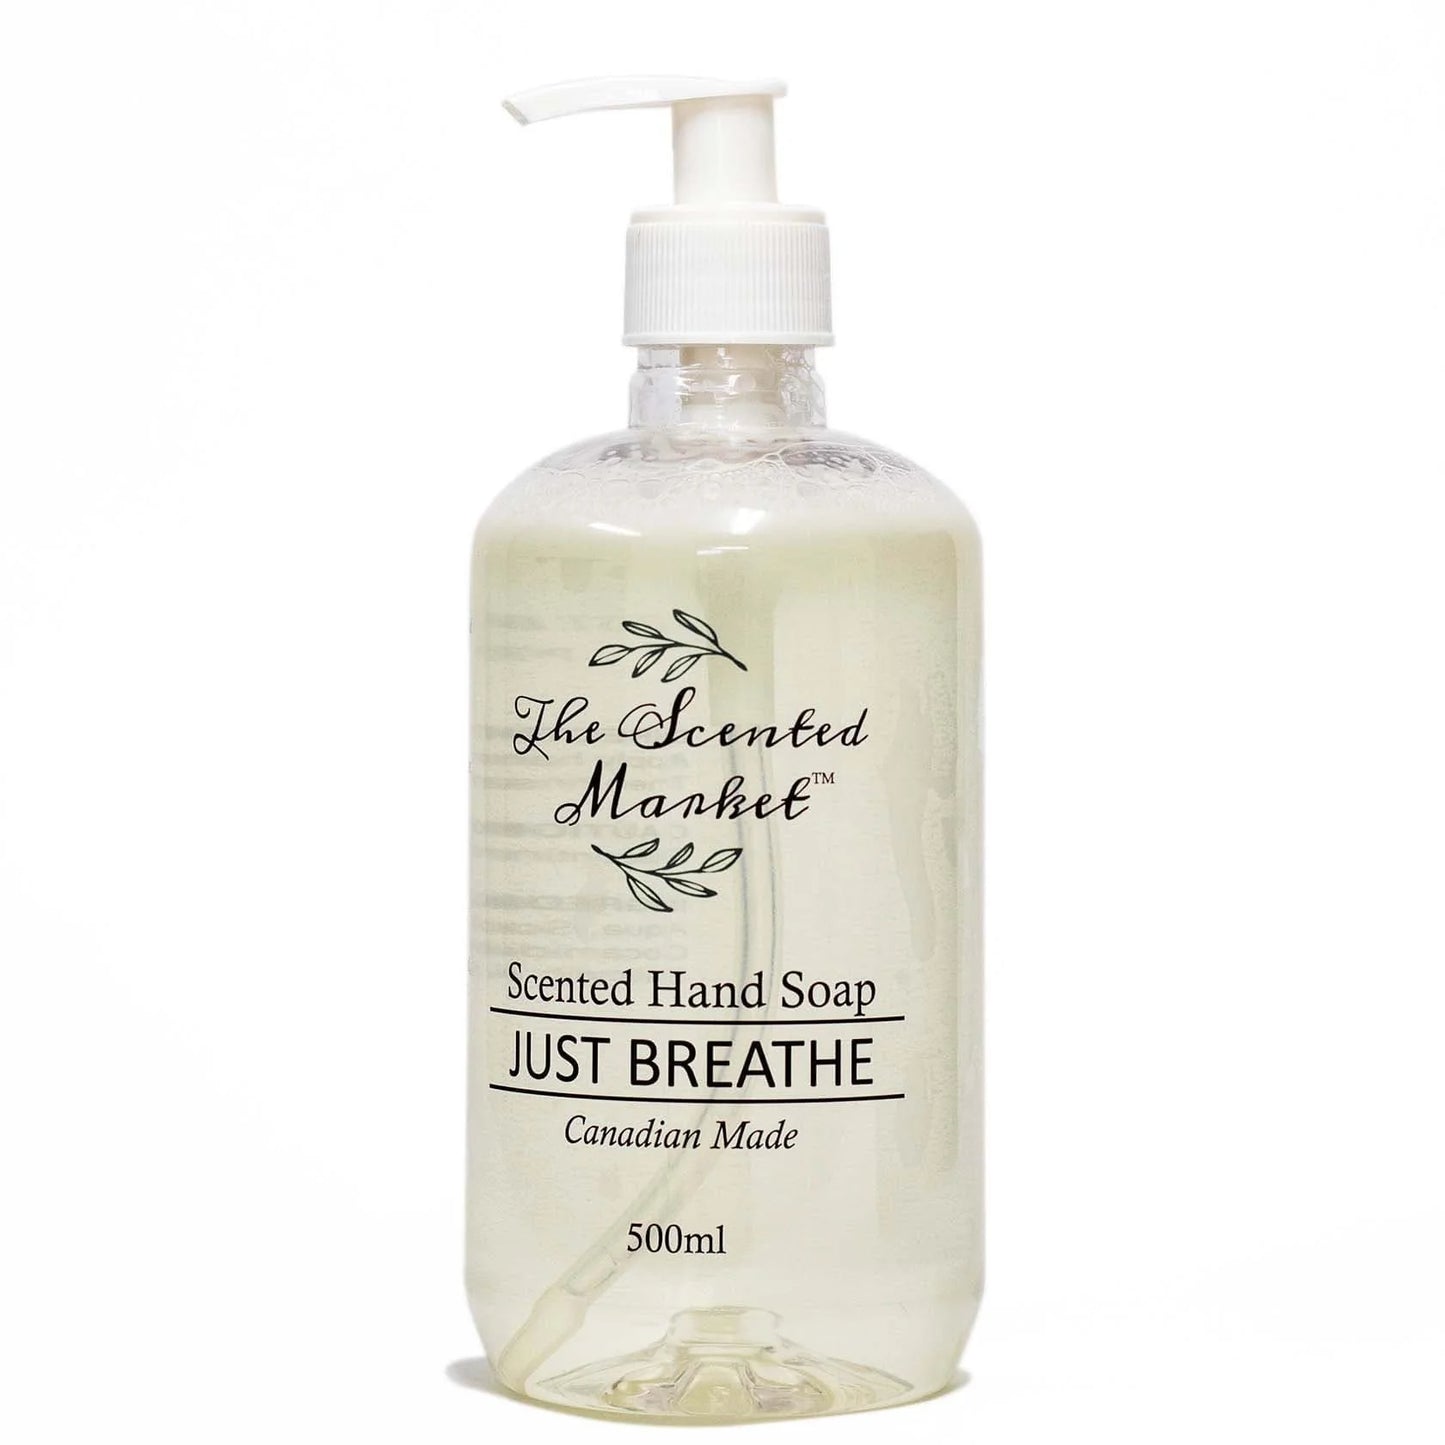 Just Breathe Hand Soap